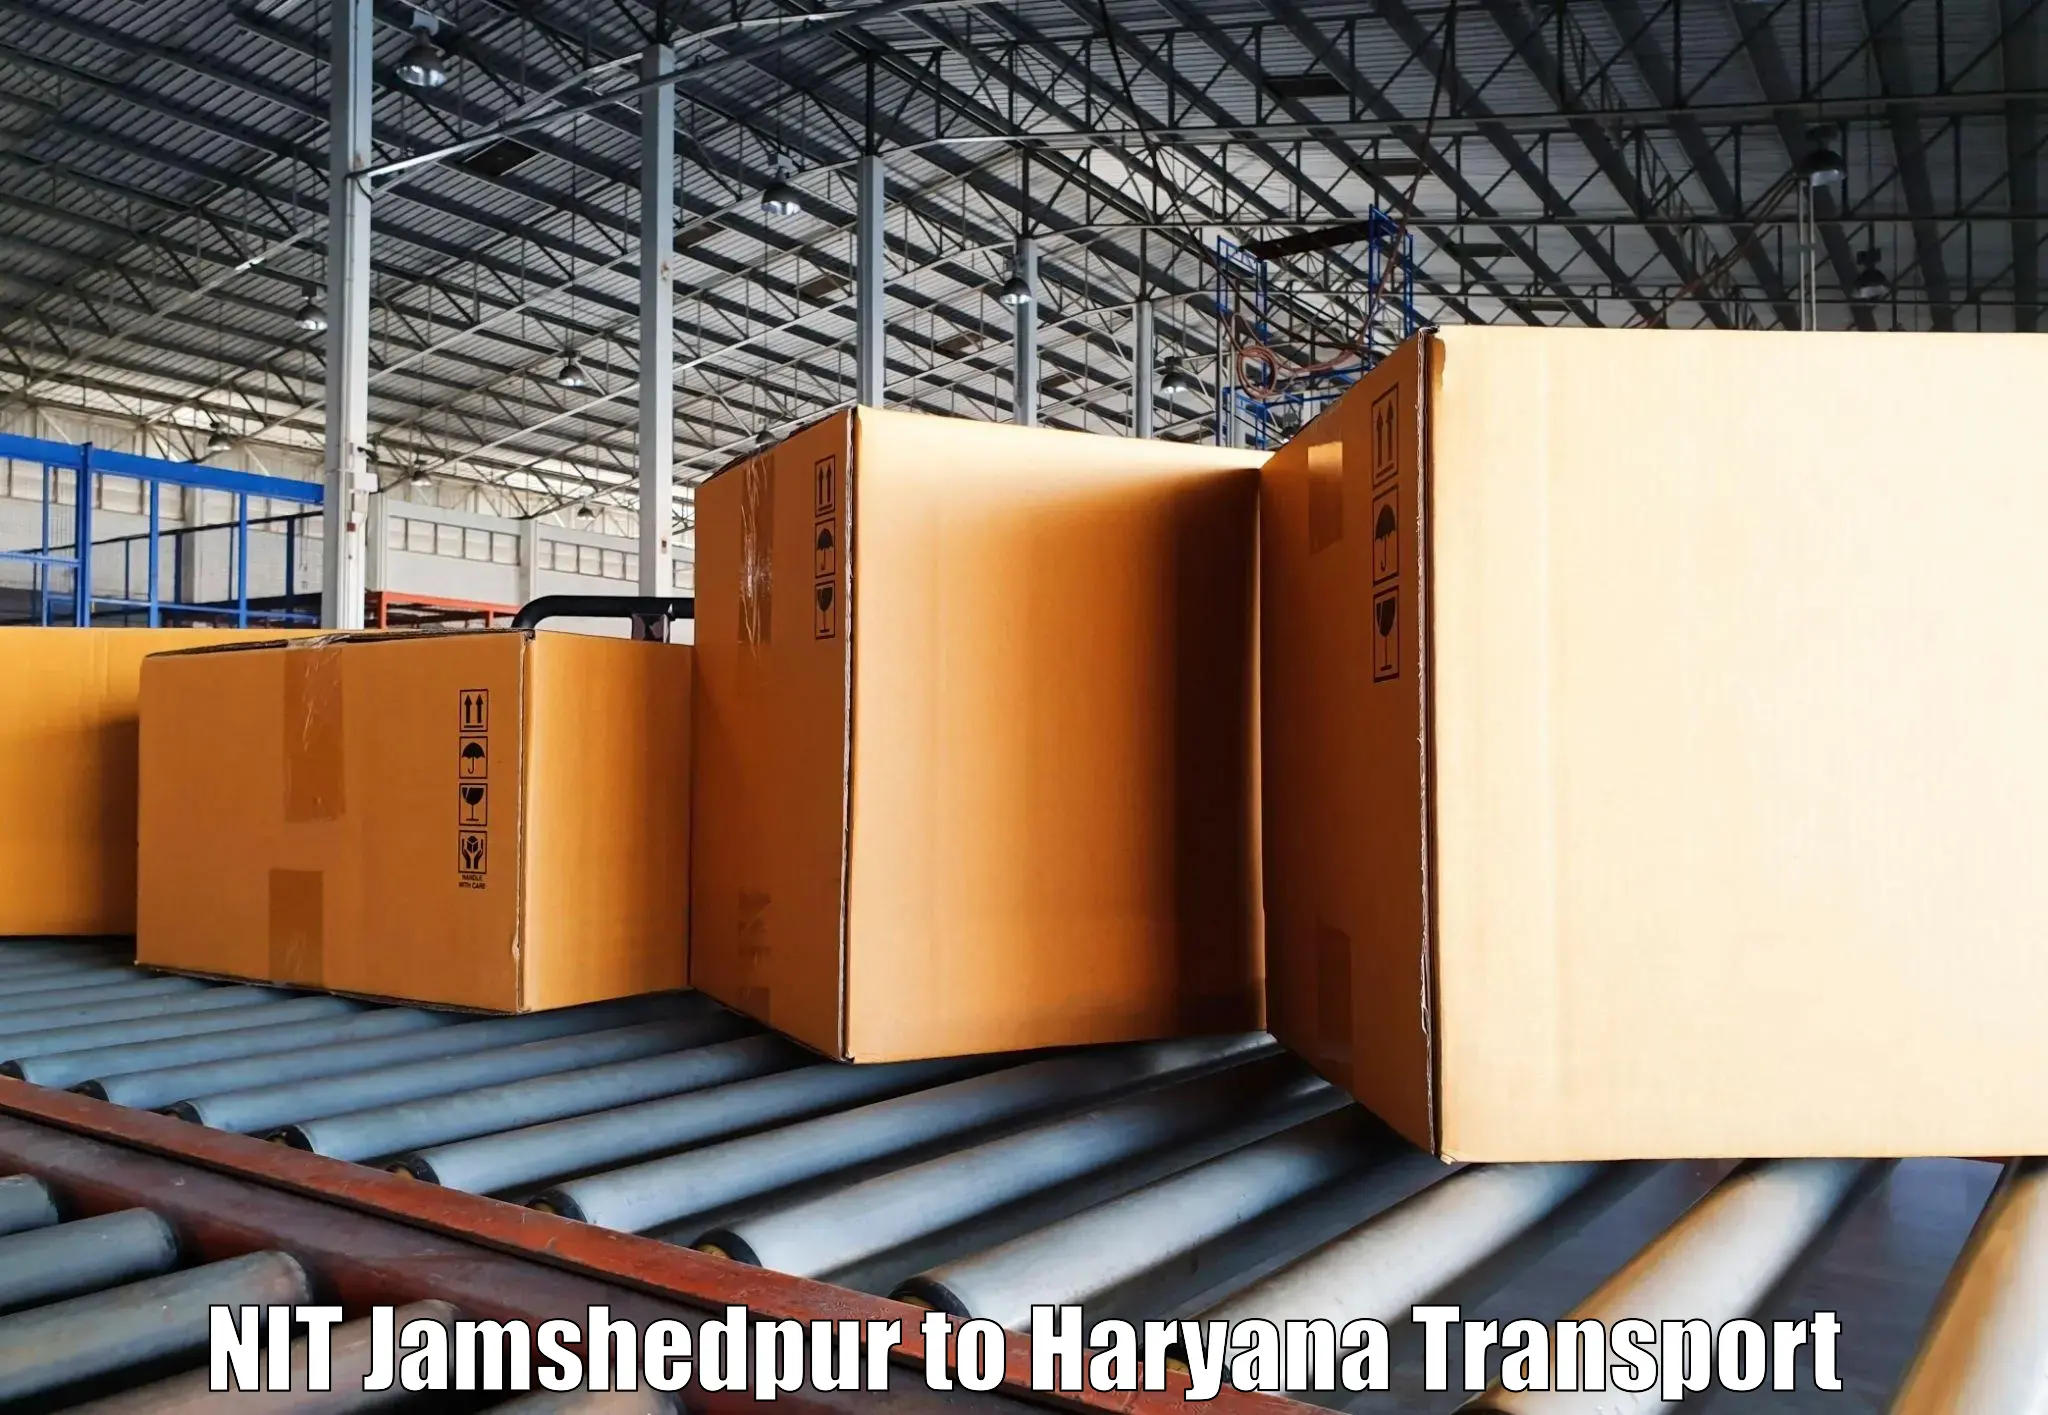 Two wheeler transport services NIT Jamshedpur to Faridabad